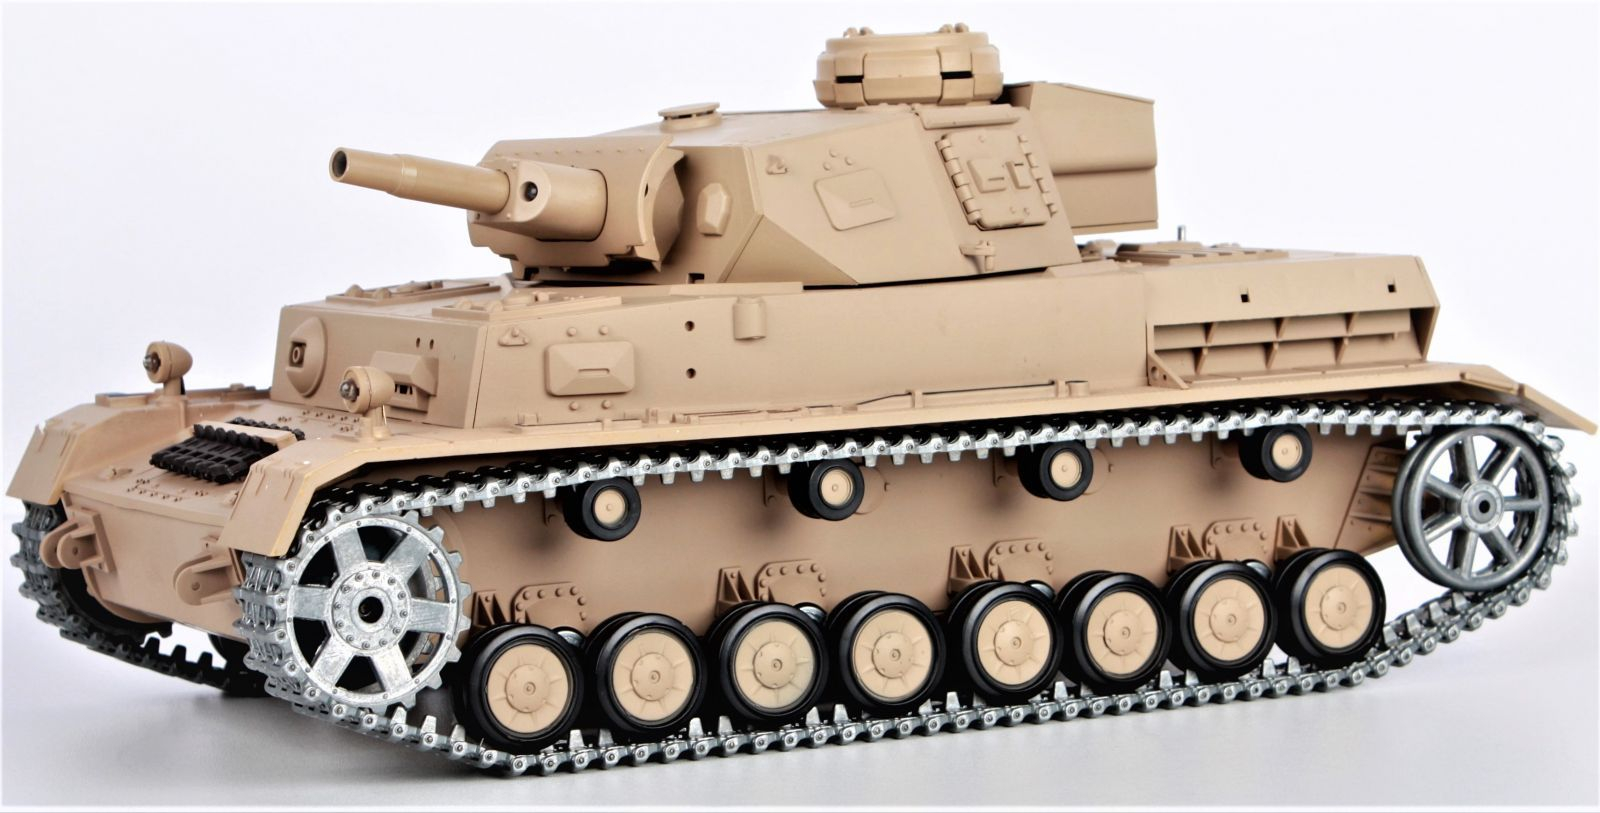 RC TANK German Panzer IV (F Type) 1:16 with sound effects, steel accessories, shoots pellets